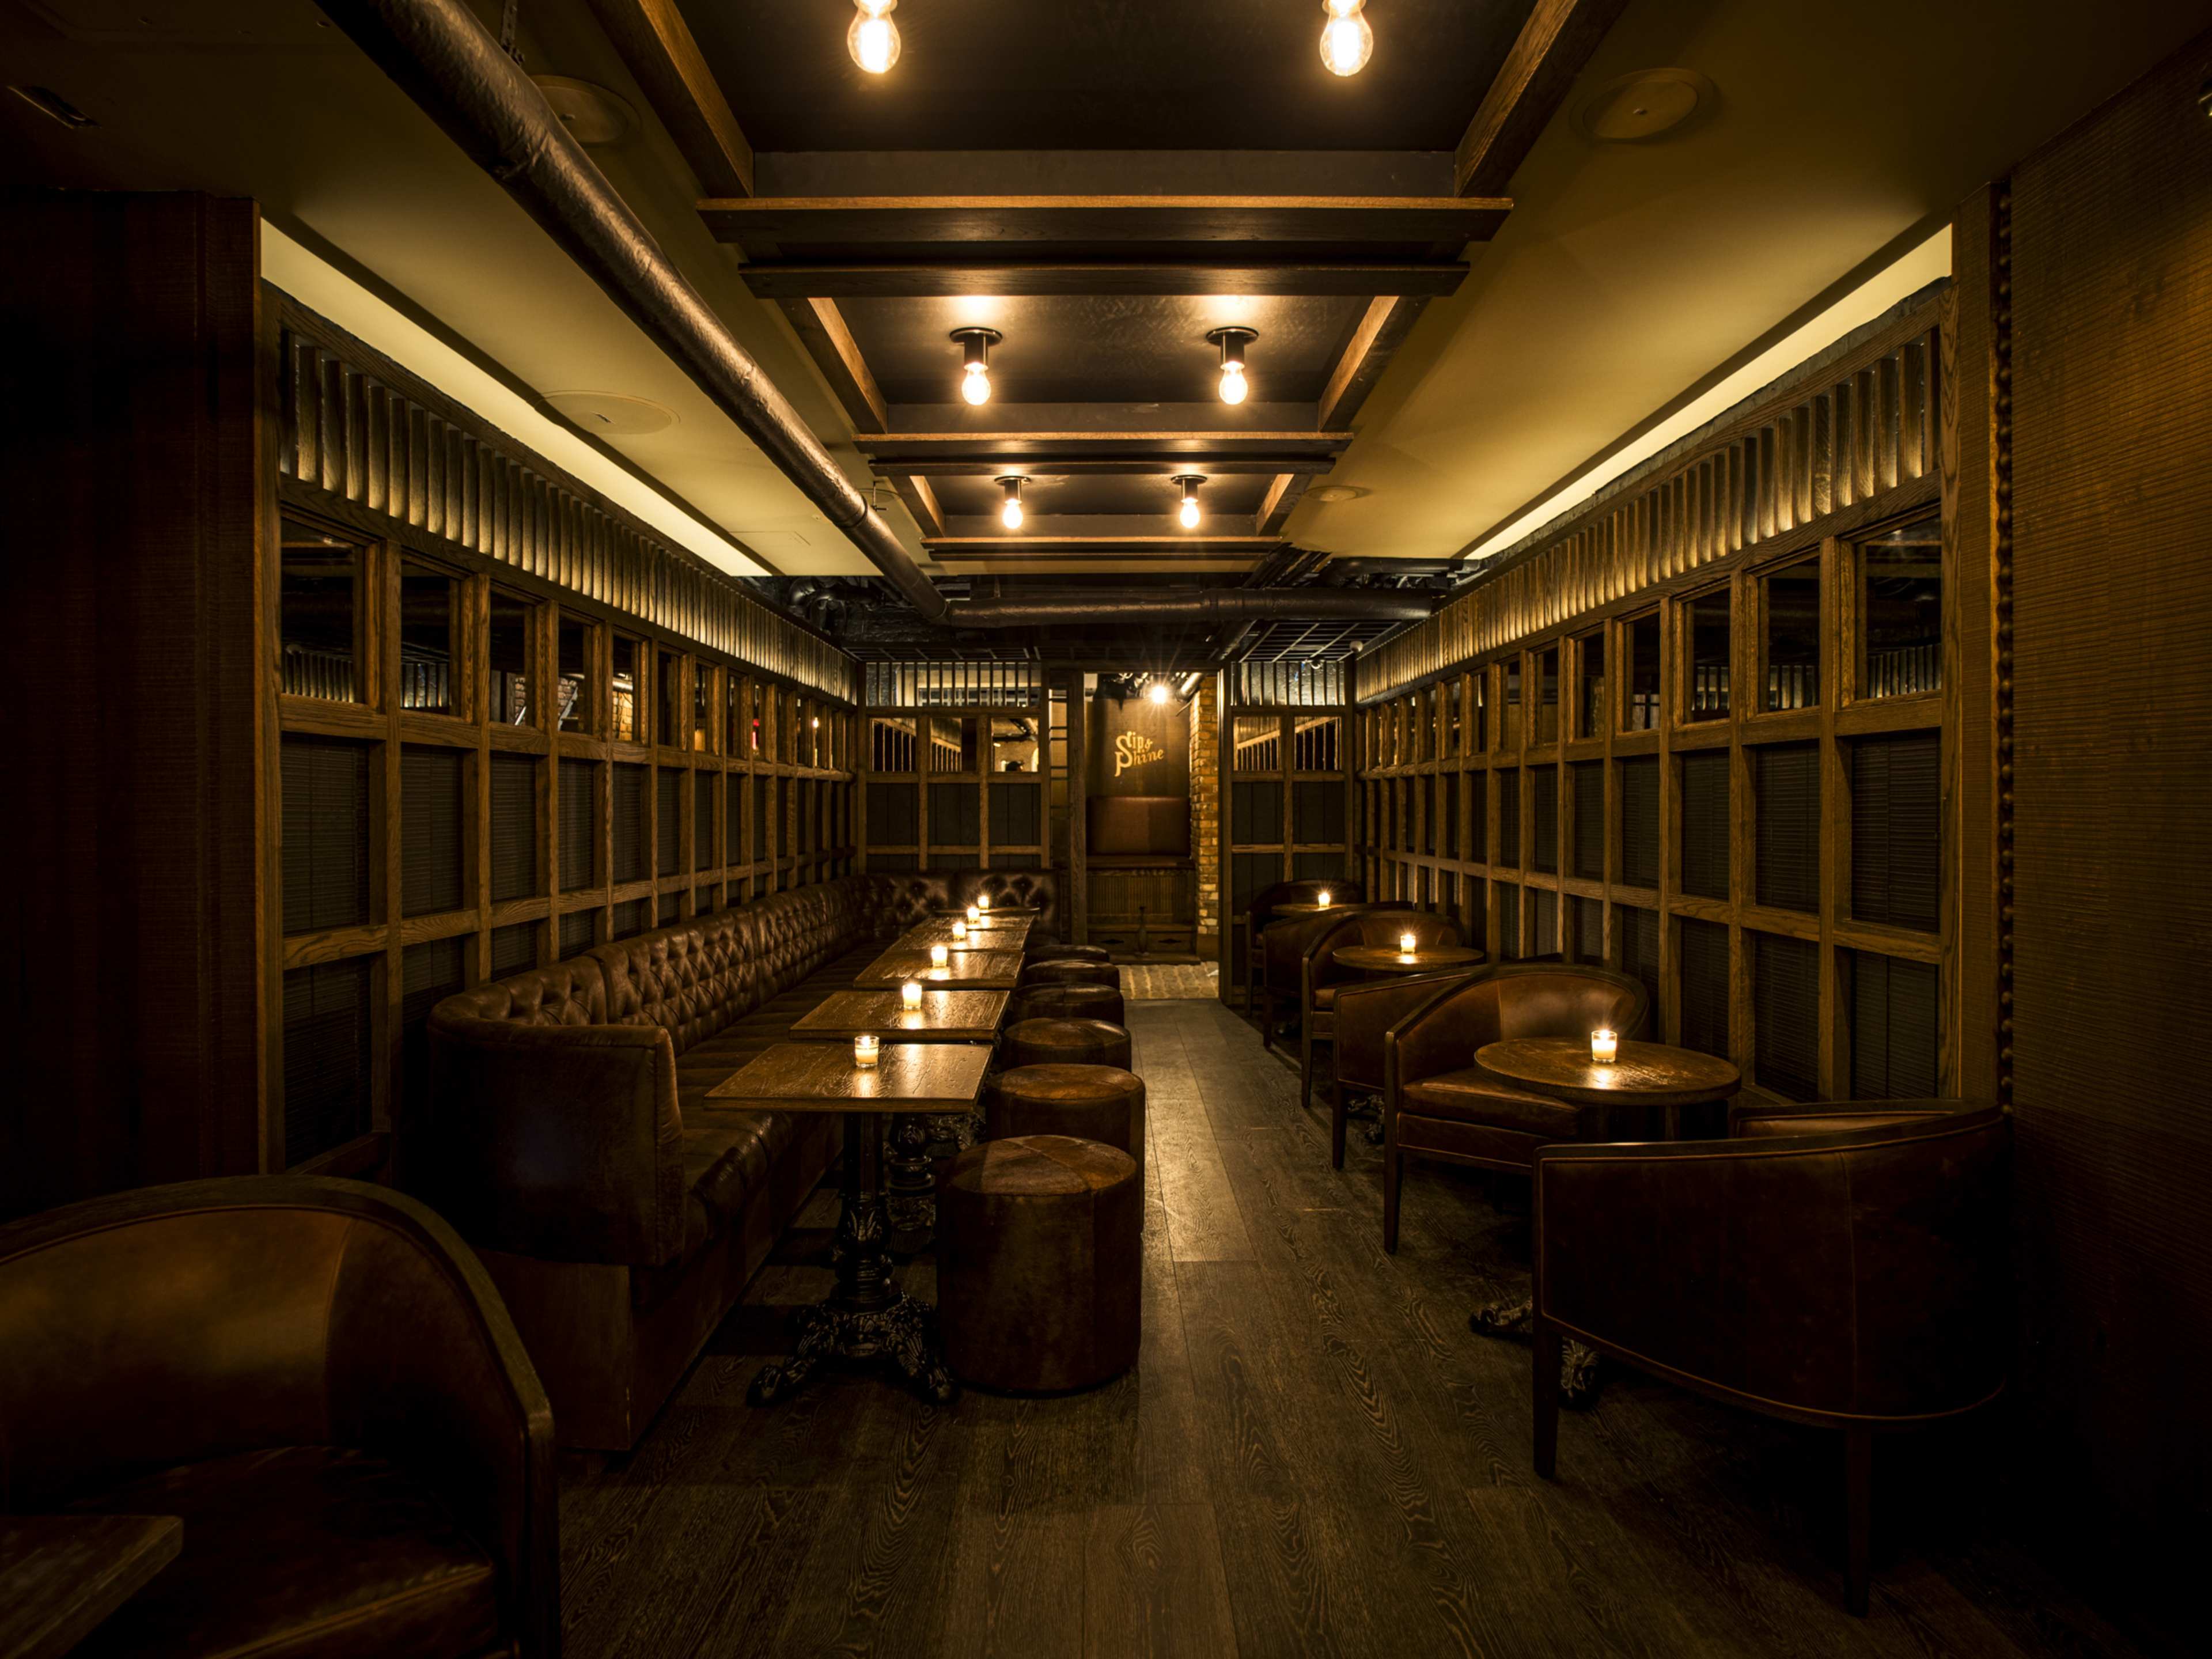 A dark bar with wood walls and candles on the tables.